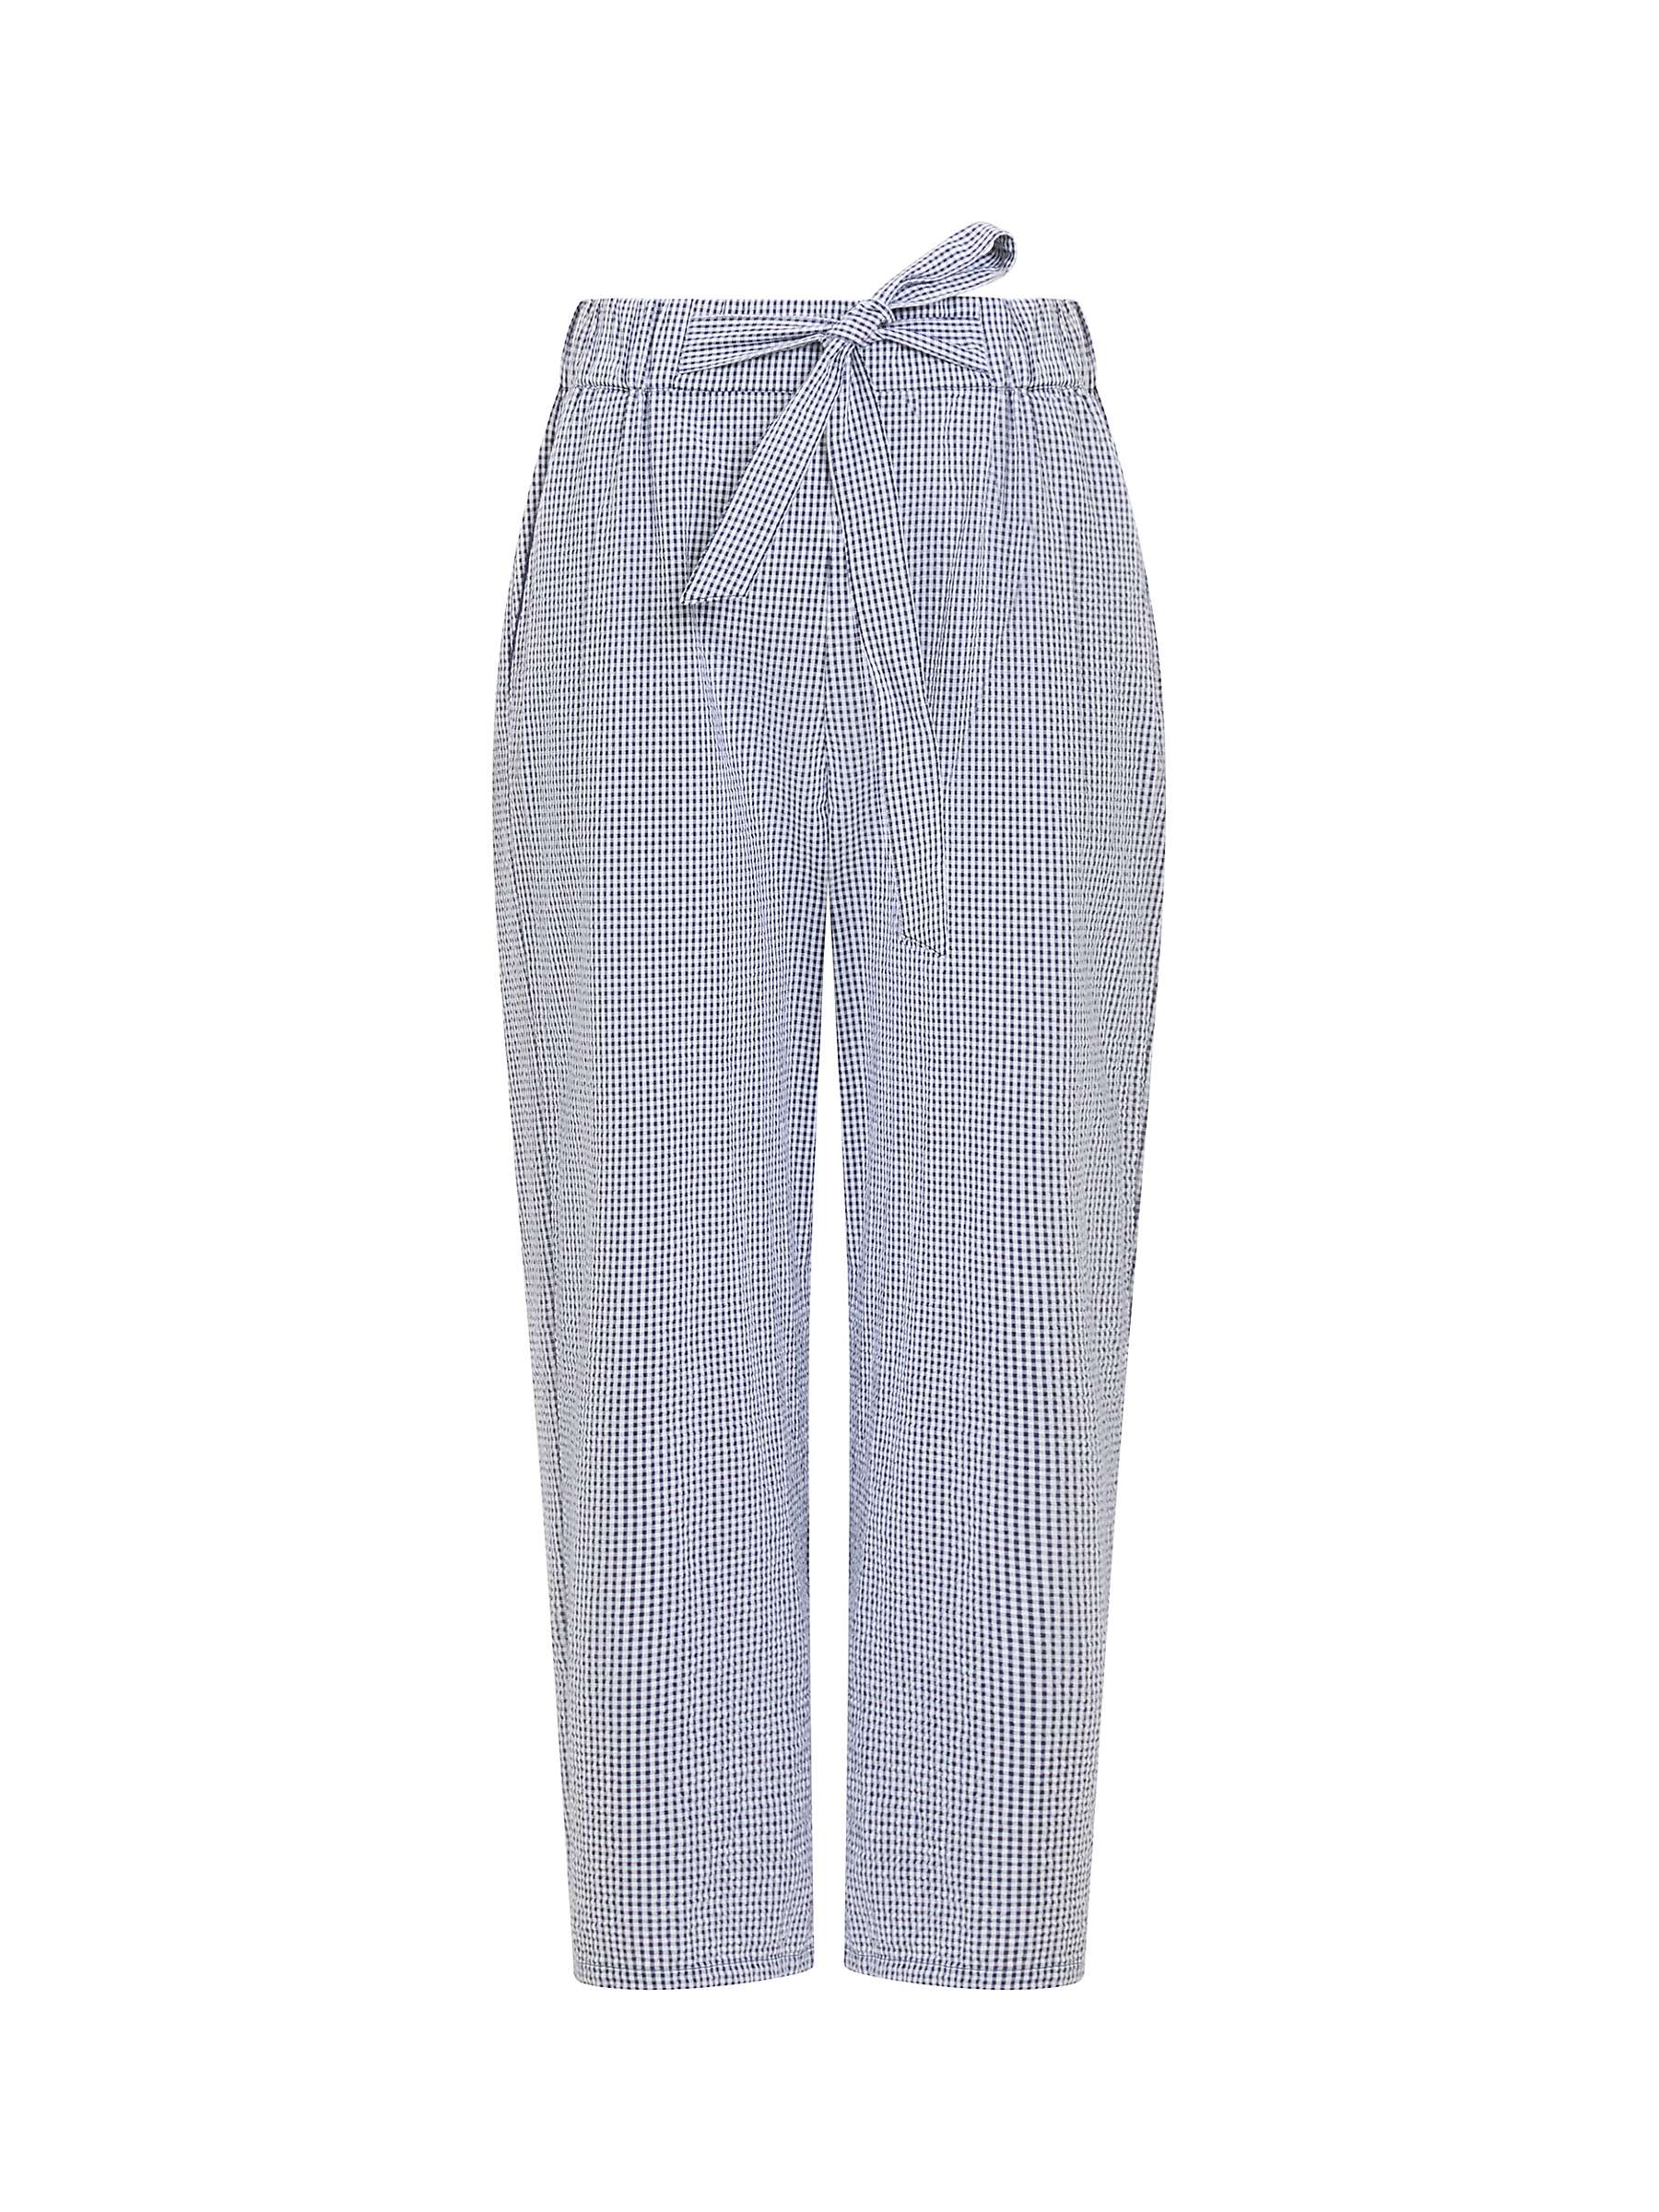 Buy Great Plains Salerno Cotton Trousers, Summer Navy/White Online at johnlewis.com